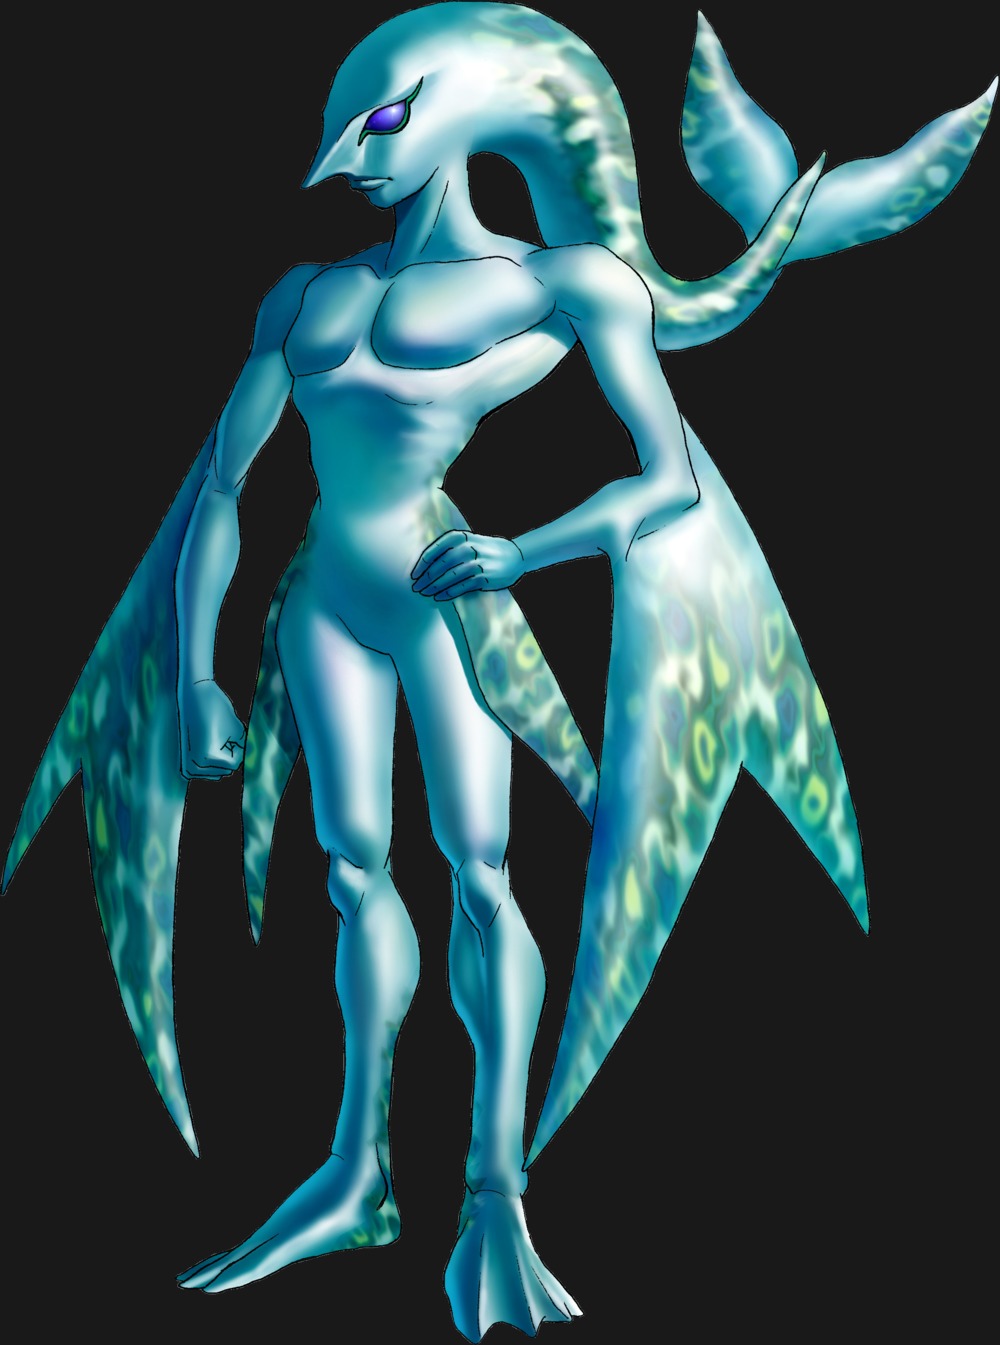 its a zora dude, they always sorta had a fish thing going on, like for exam...